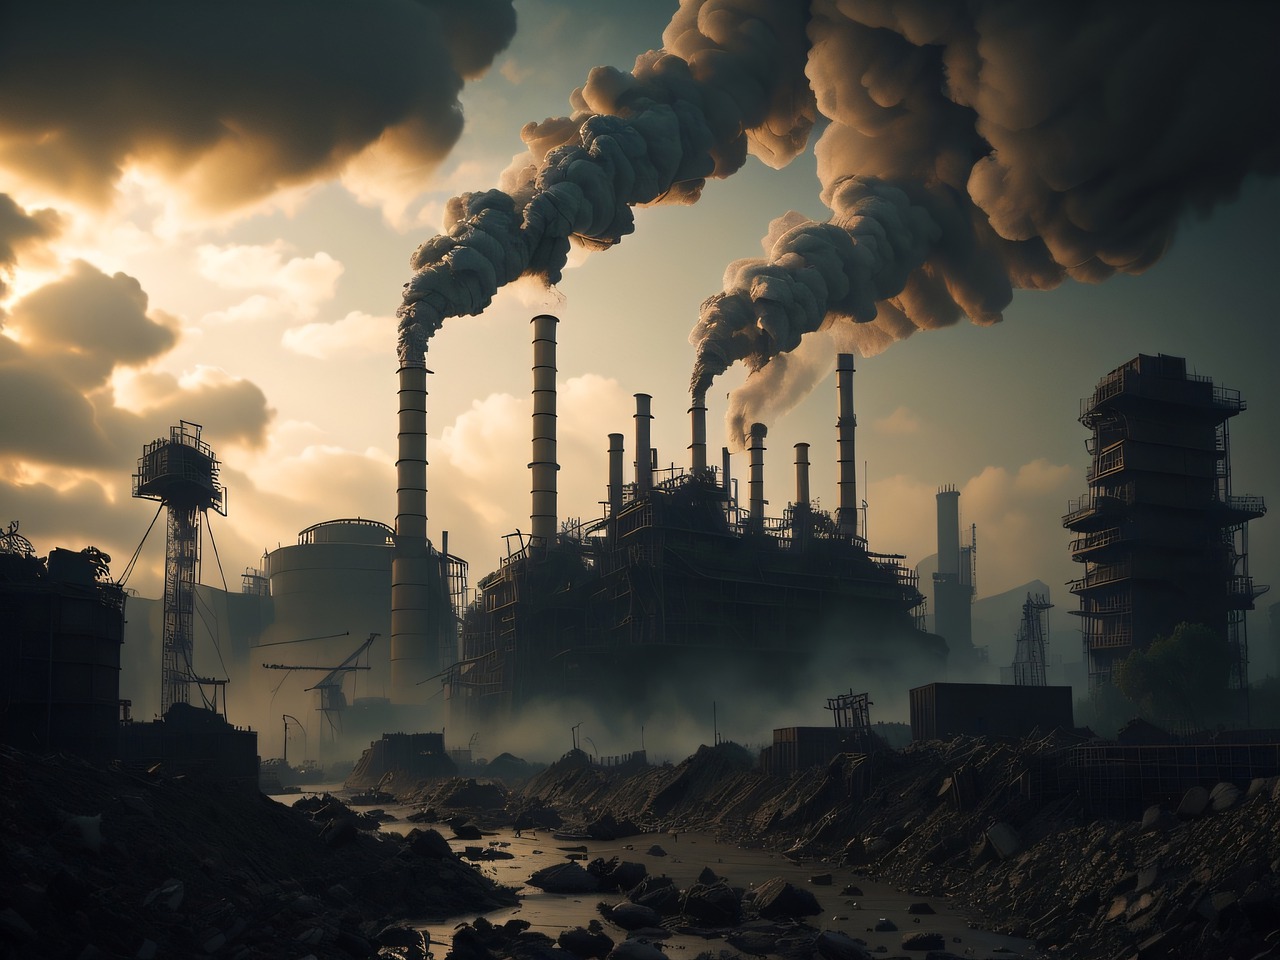 The Impact of Industrial Pollution on Local Communities